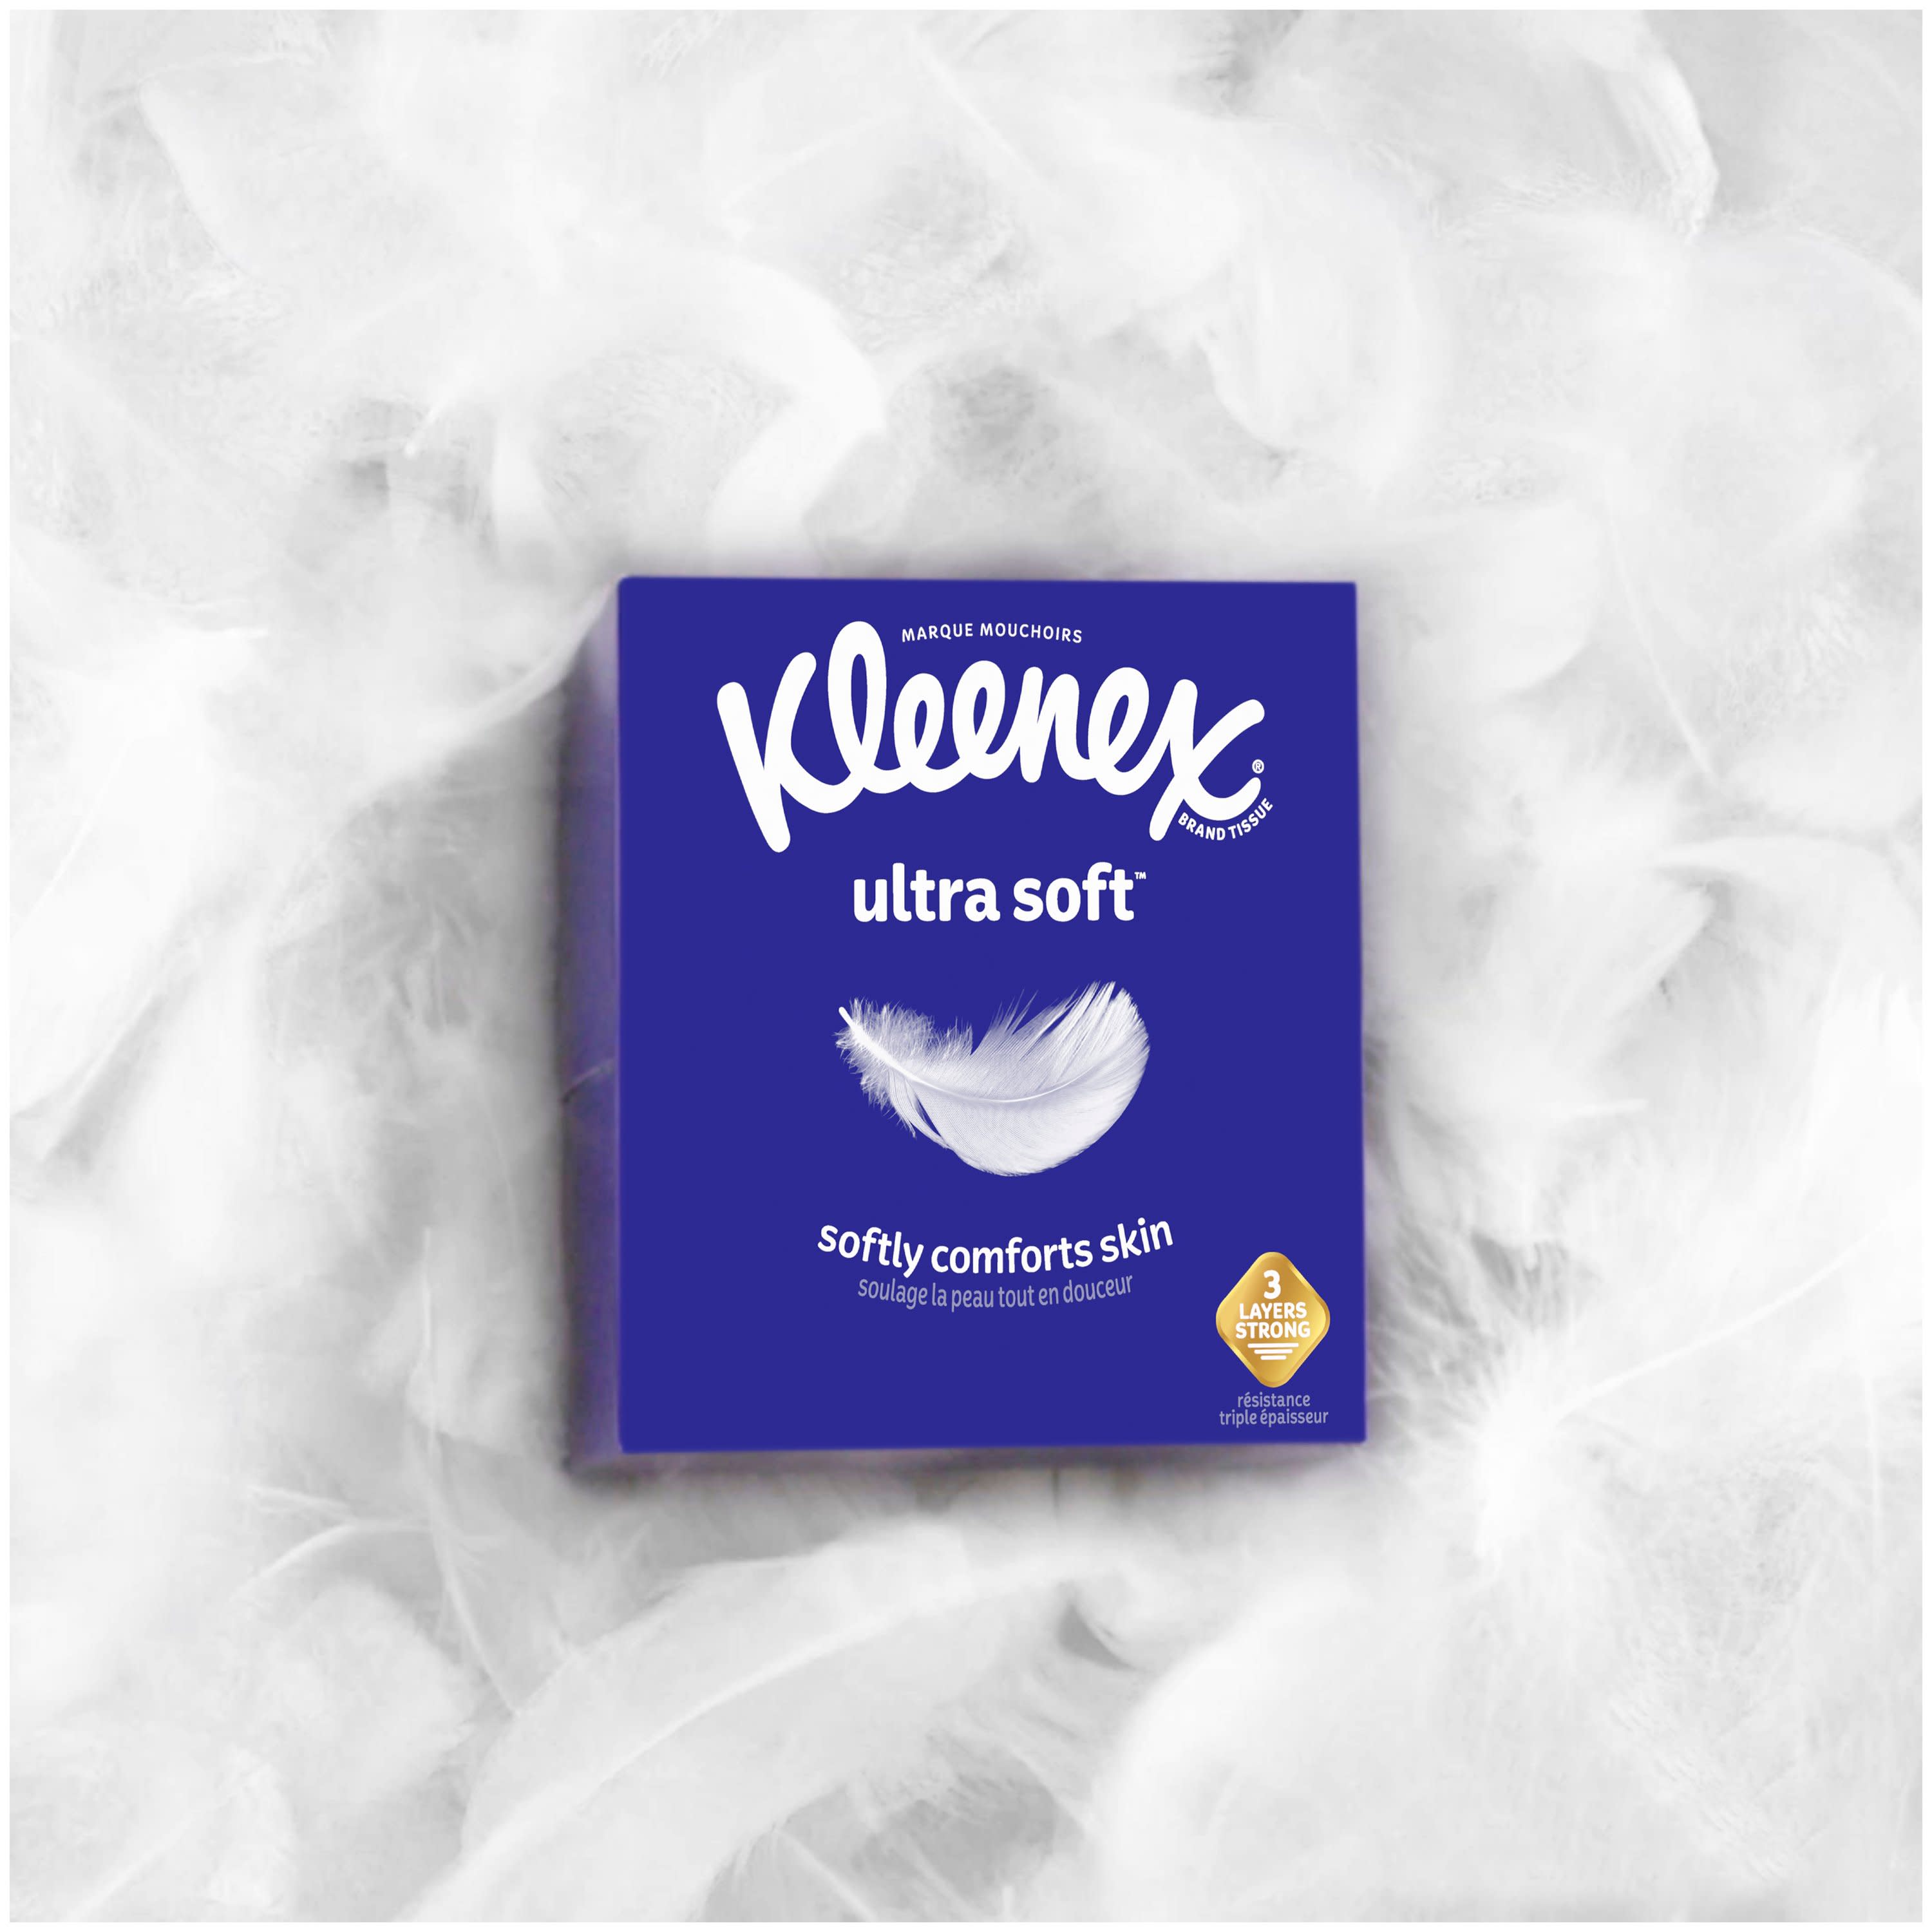 Kleenex Ultra Soft Facial Tissues, 4 Cube Boxes, 65 White Tissues per Box, 3-Ply (260 Total) - image 4 of 11